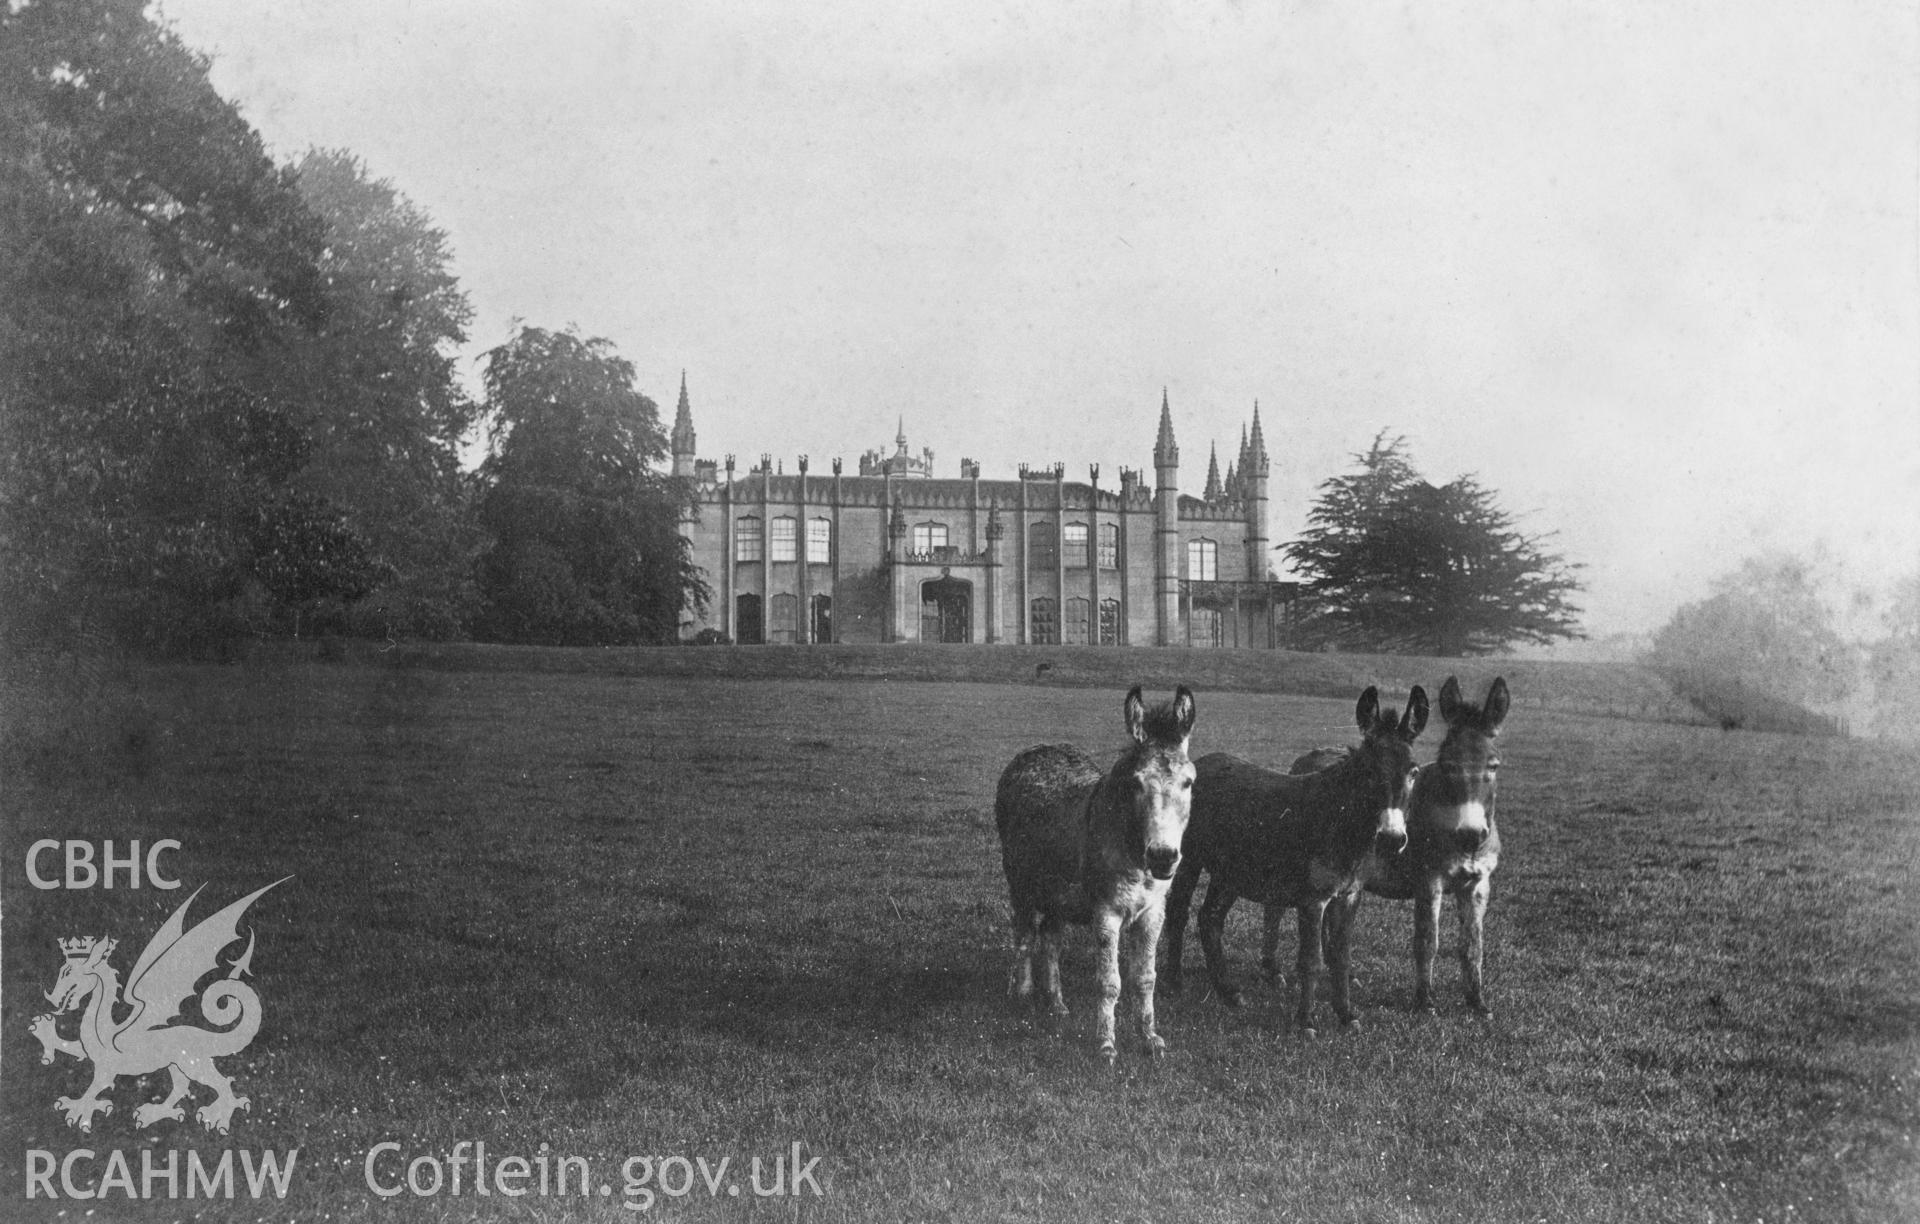 Digital copy of a black and white nitrate negative, exterior view of Garth Hall in its setting with 3 donkeys in the foreground.